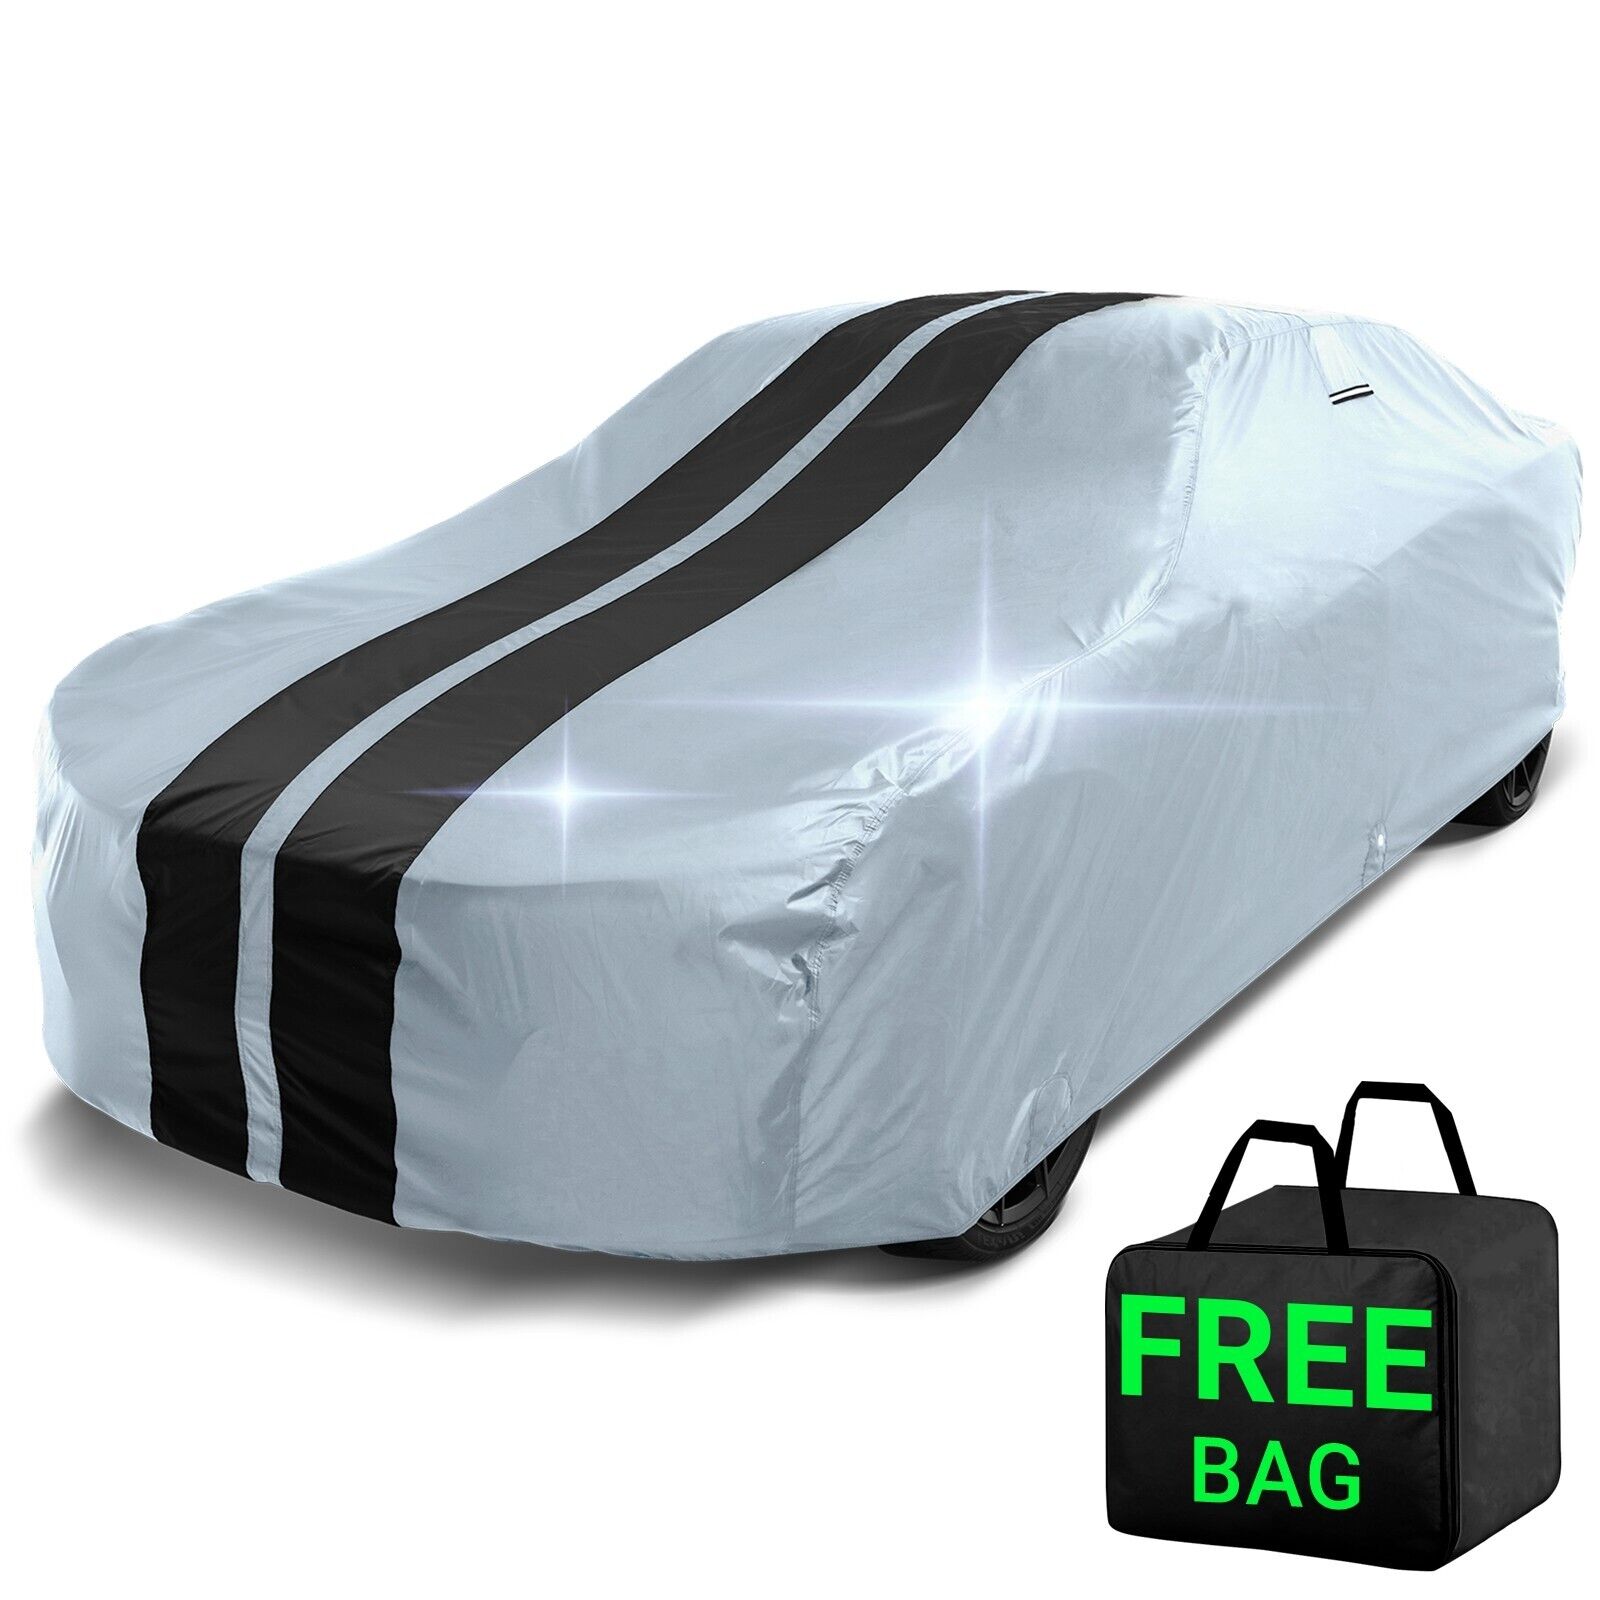 1962-1981 MG MGB Roadster, GT Custom Car Cover - All-Weather Waterproof Outdoor